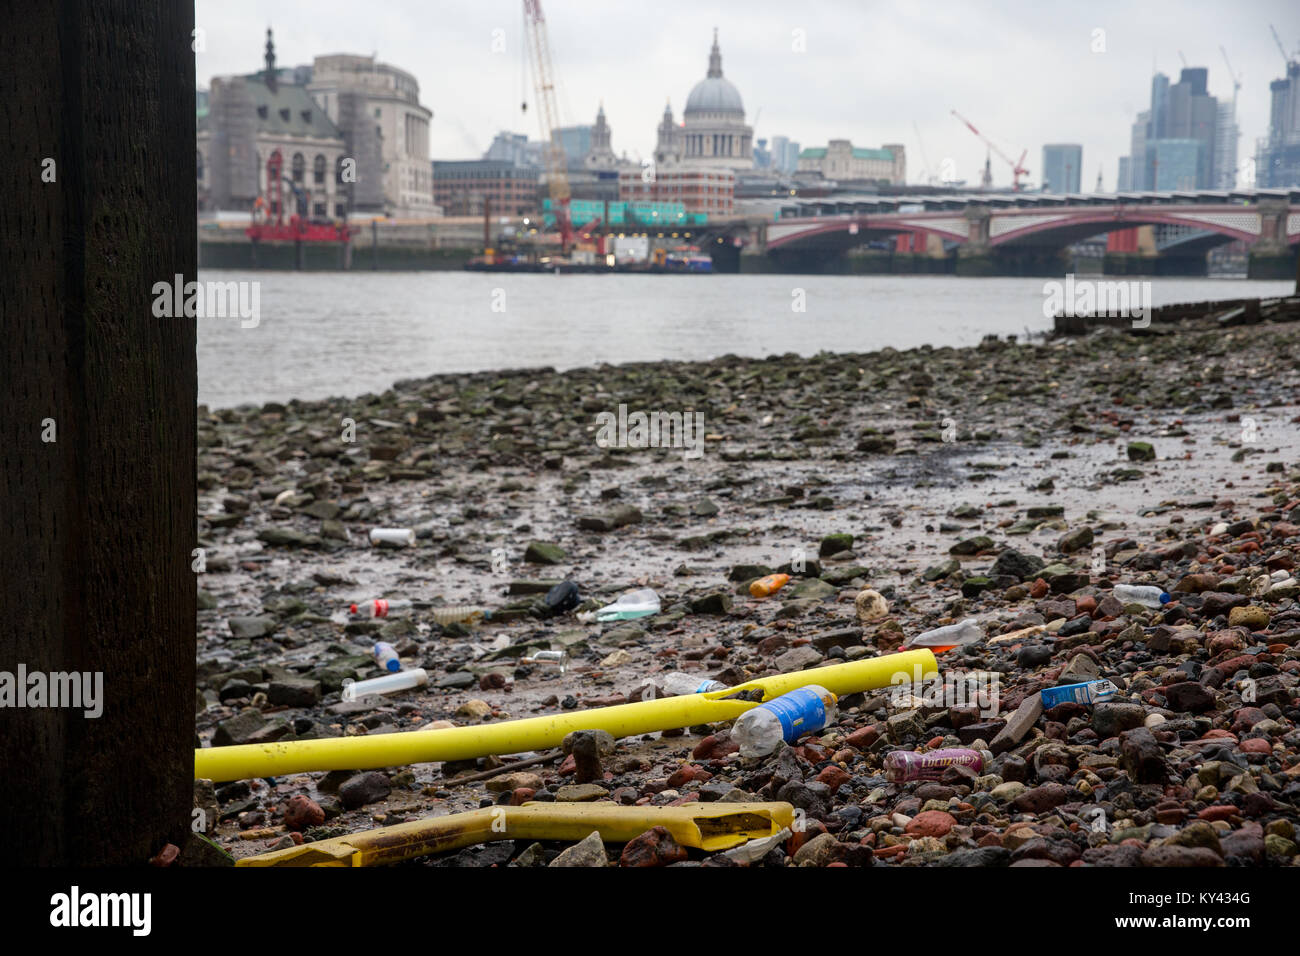 Plastic rubbish and bottles on the banks of the River Thames at low tide with St Pauls and the City of London in the background Stock Photo